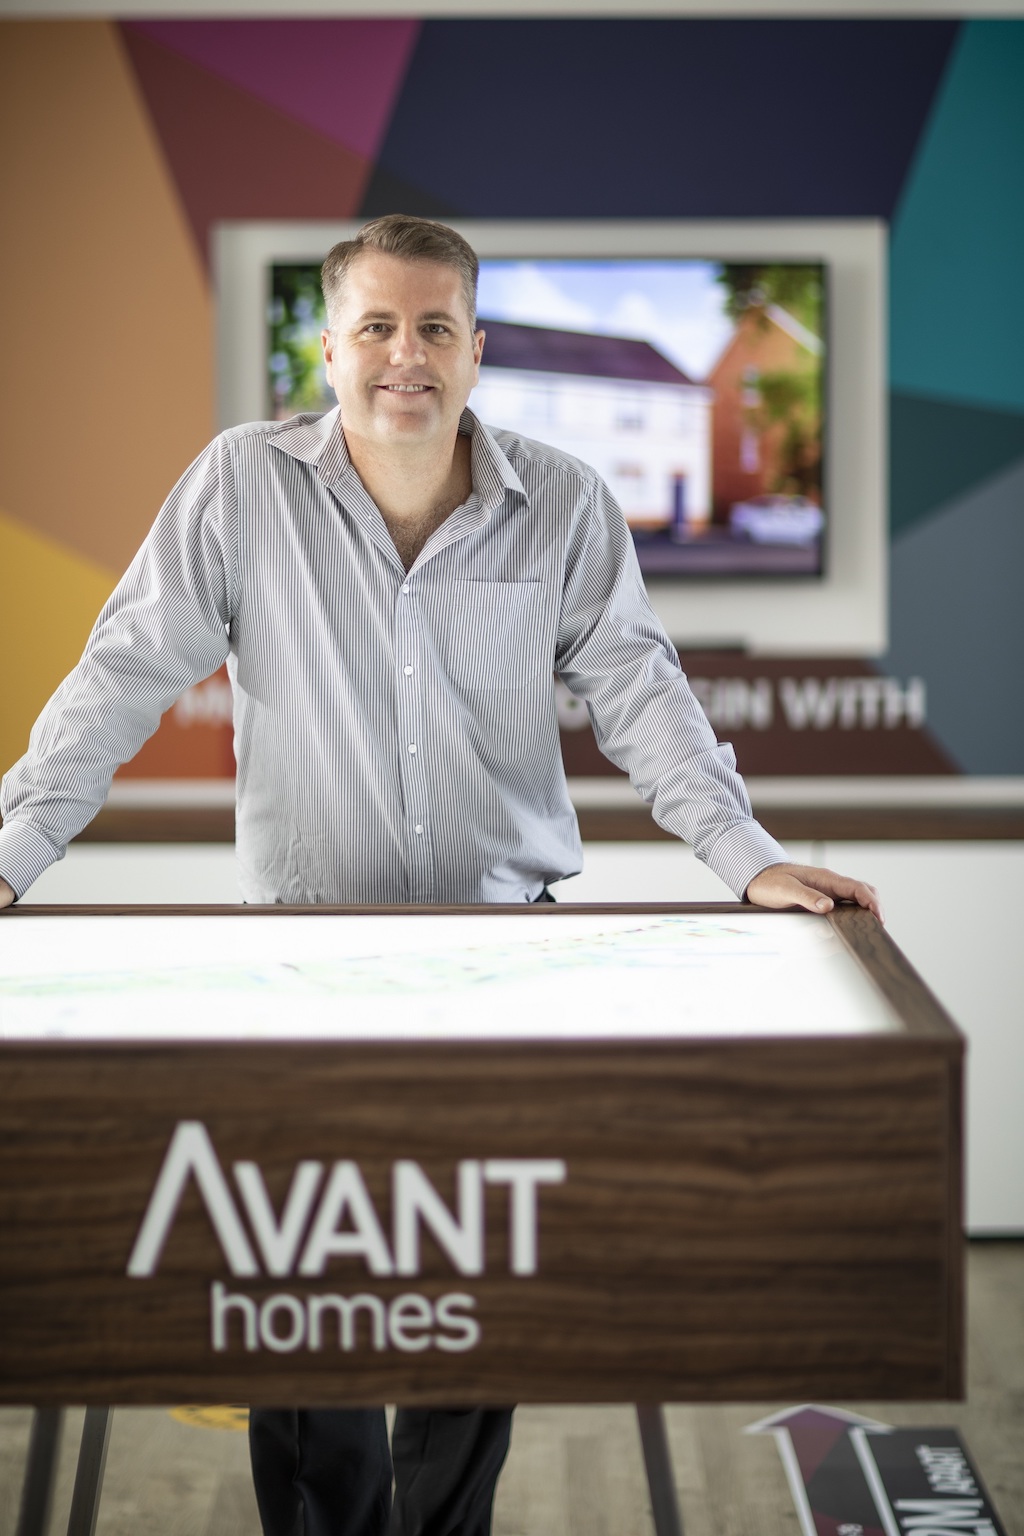 Avant Homes appoints Mark Pearson as Group Director of Marketing Technologies